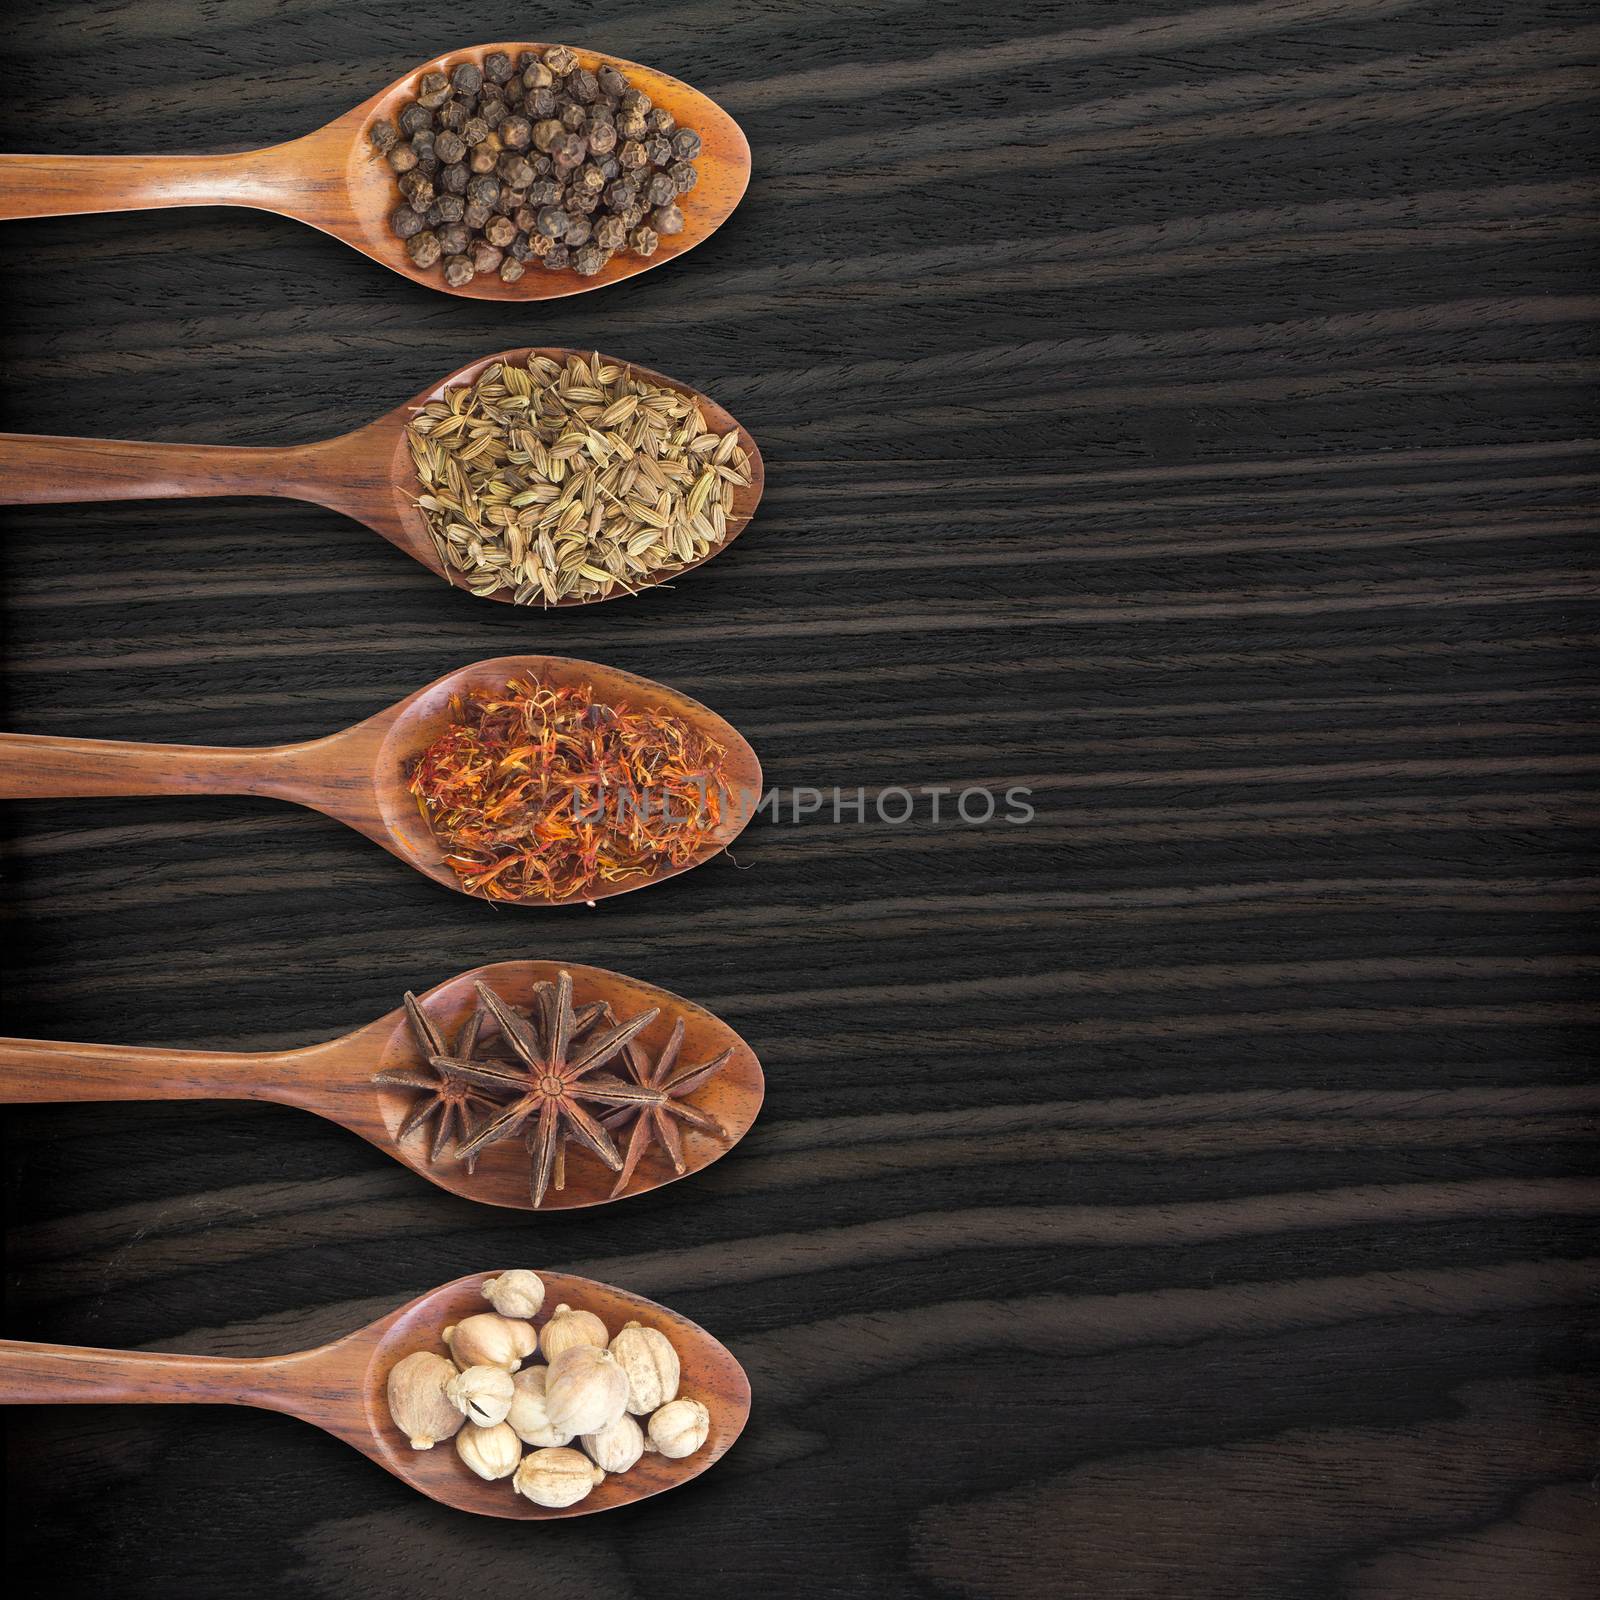 Set of 5 spices on a wooden spoon by wyoosumran